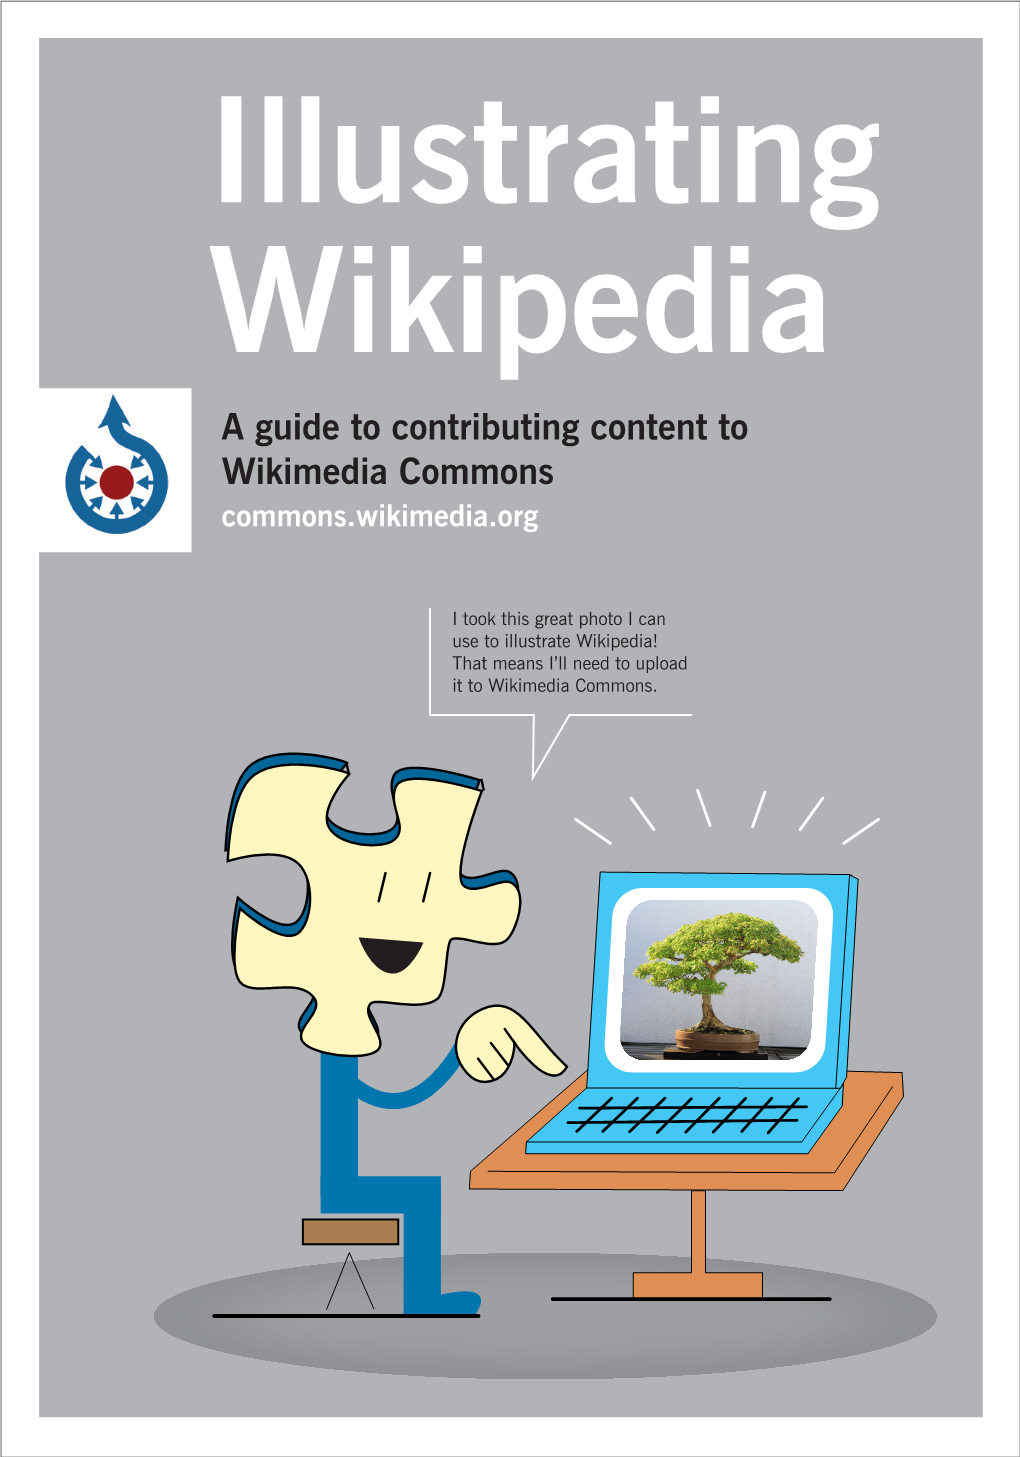 A Guide to Contributing Content to Wikimedia Commons Commons.Wikimedia.Org